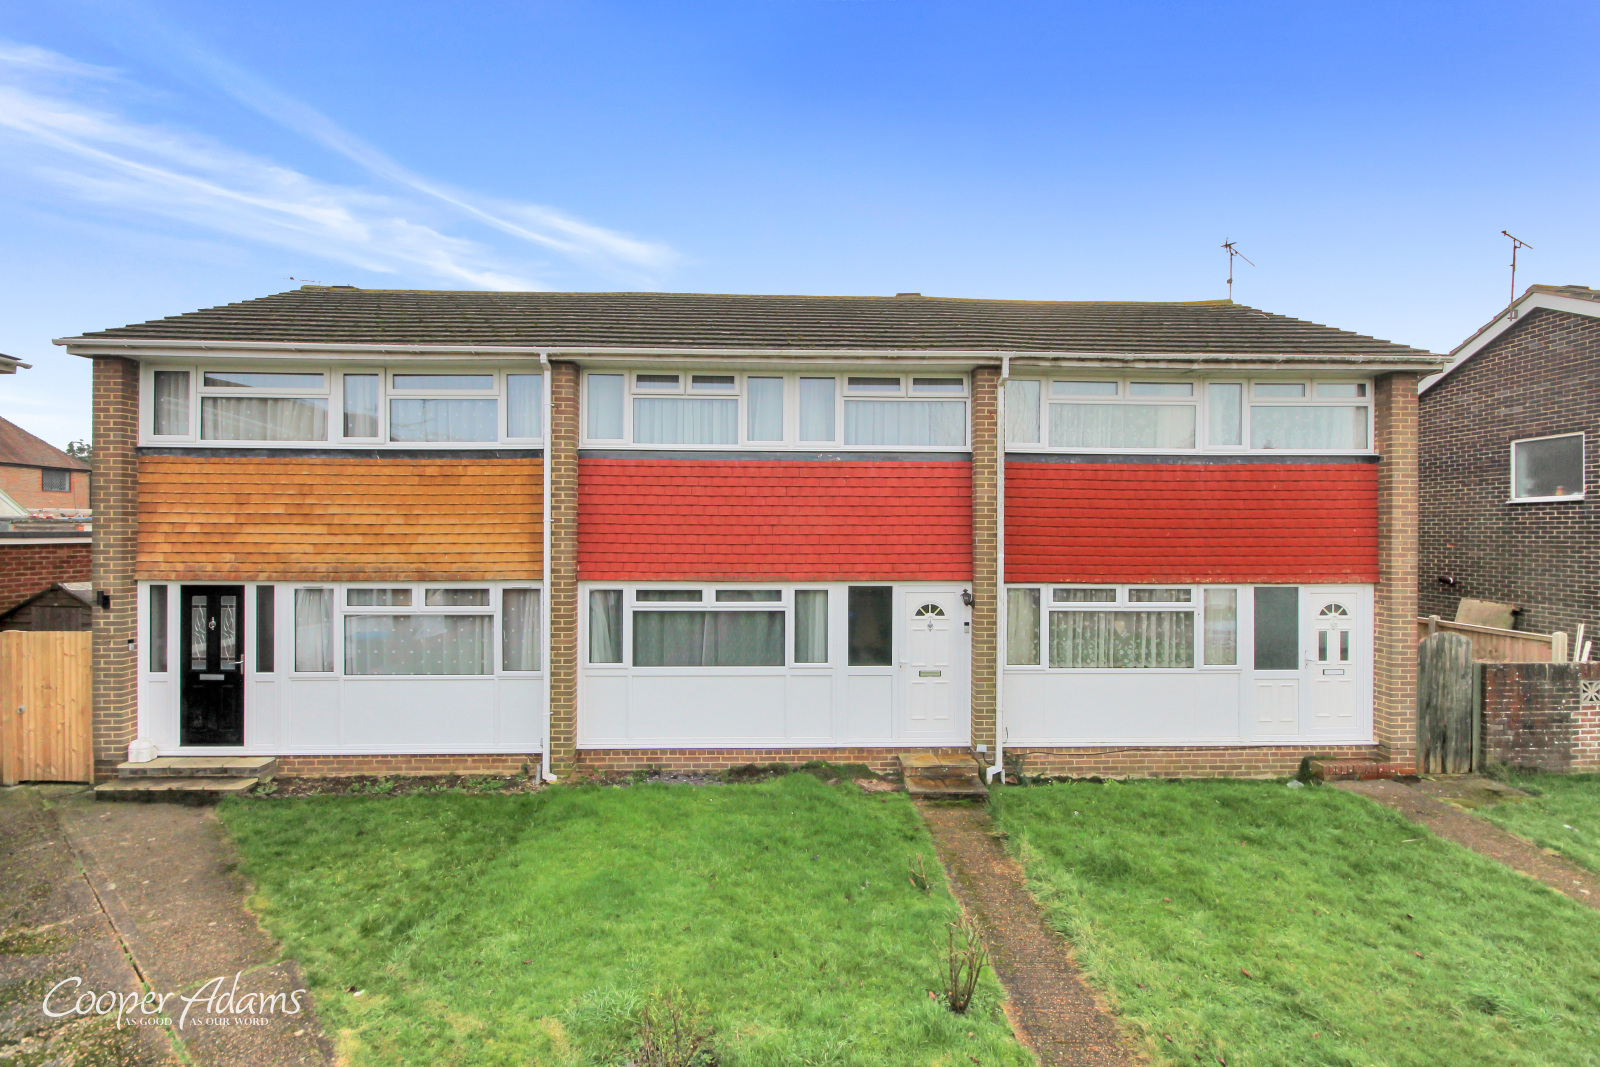 3 bed house for sale in Wolstenbury Road, Rustington - Property Image 1